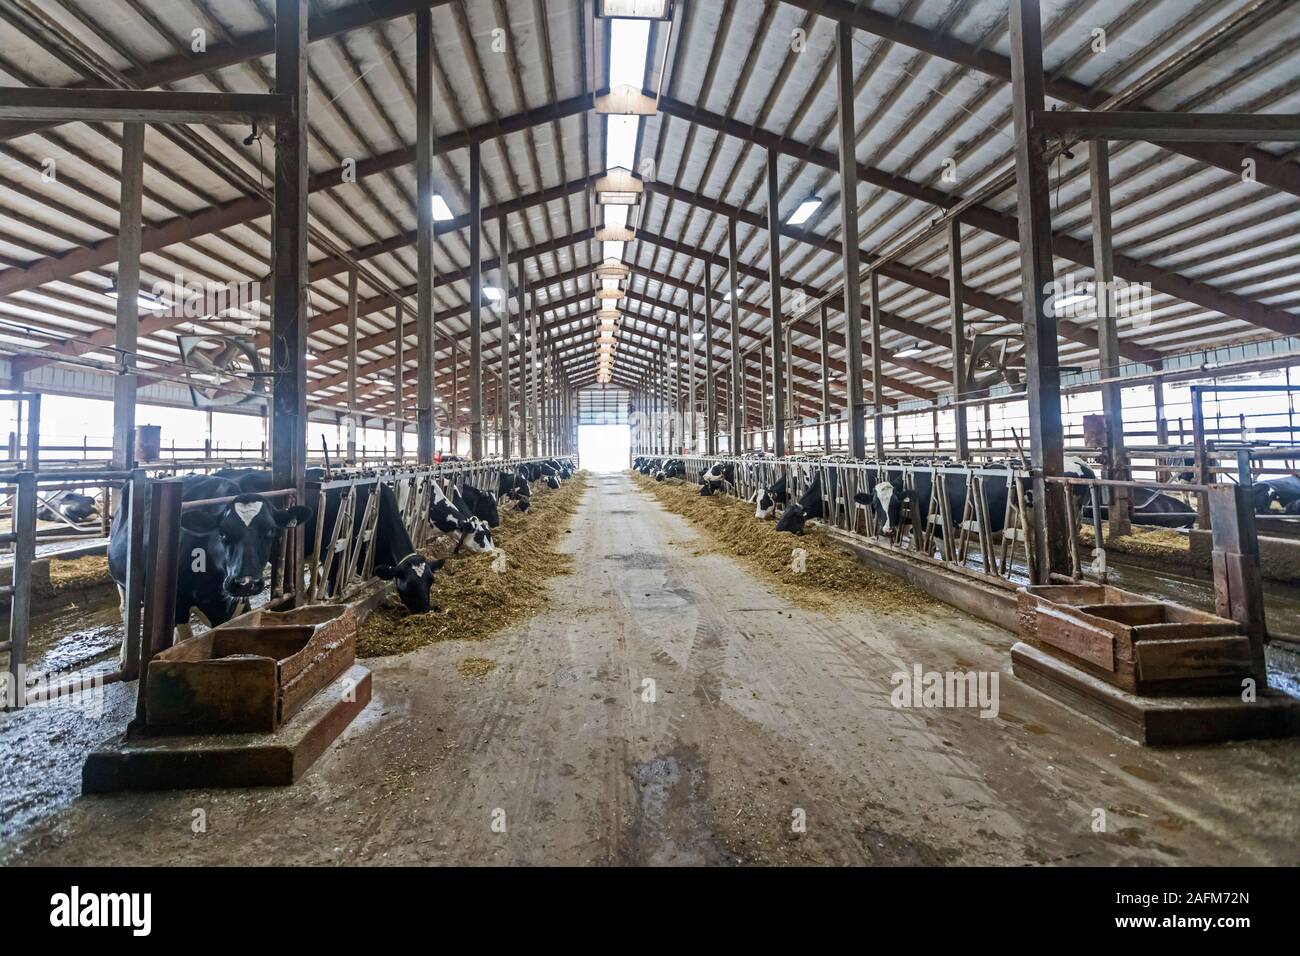 Omro, Wisconsin - The cattle barn at Knigge Farms, a dairy farm with automated milking machines. Stock Photo